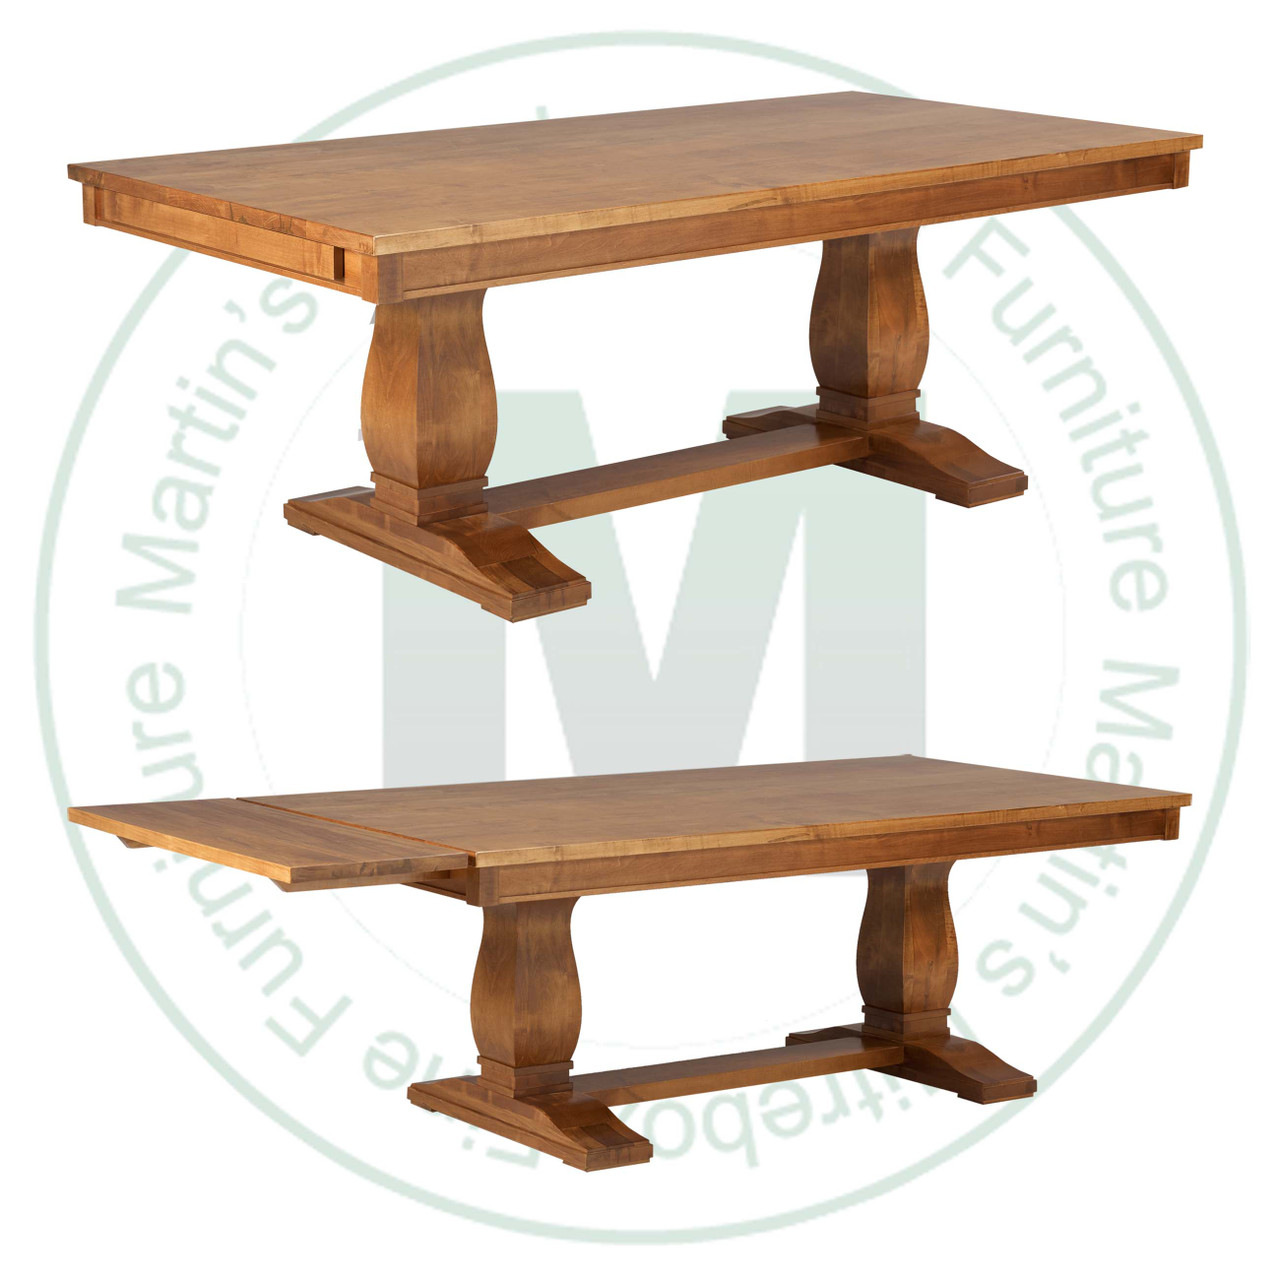 Maple Madrid Solid Top Double Pedestal Table 54''D x 72''W x 30''H With 2 - 16'' Leaves On End Table Has 1.25'' Thick Top